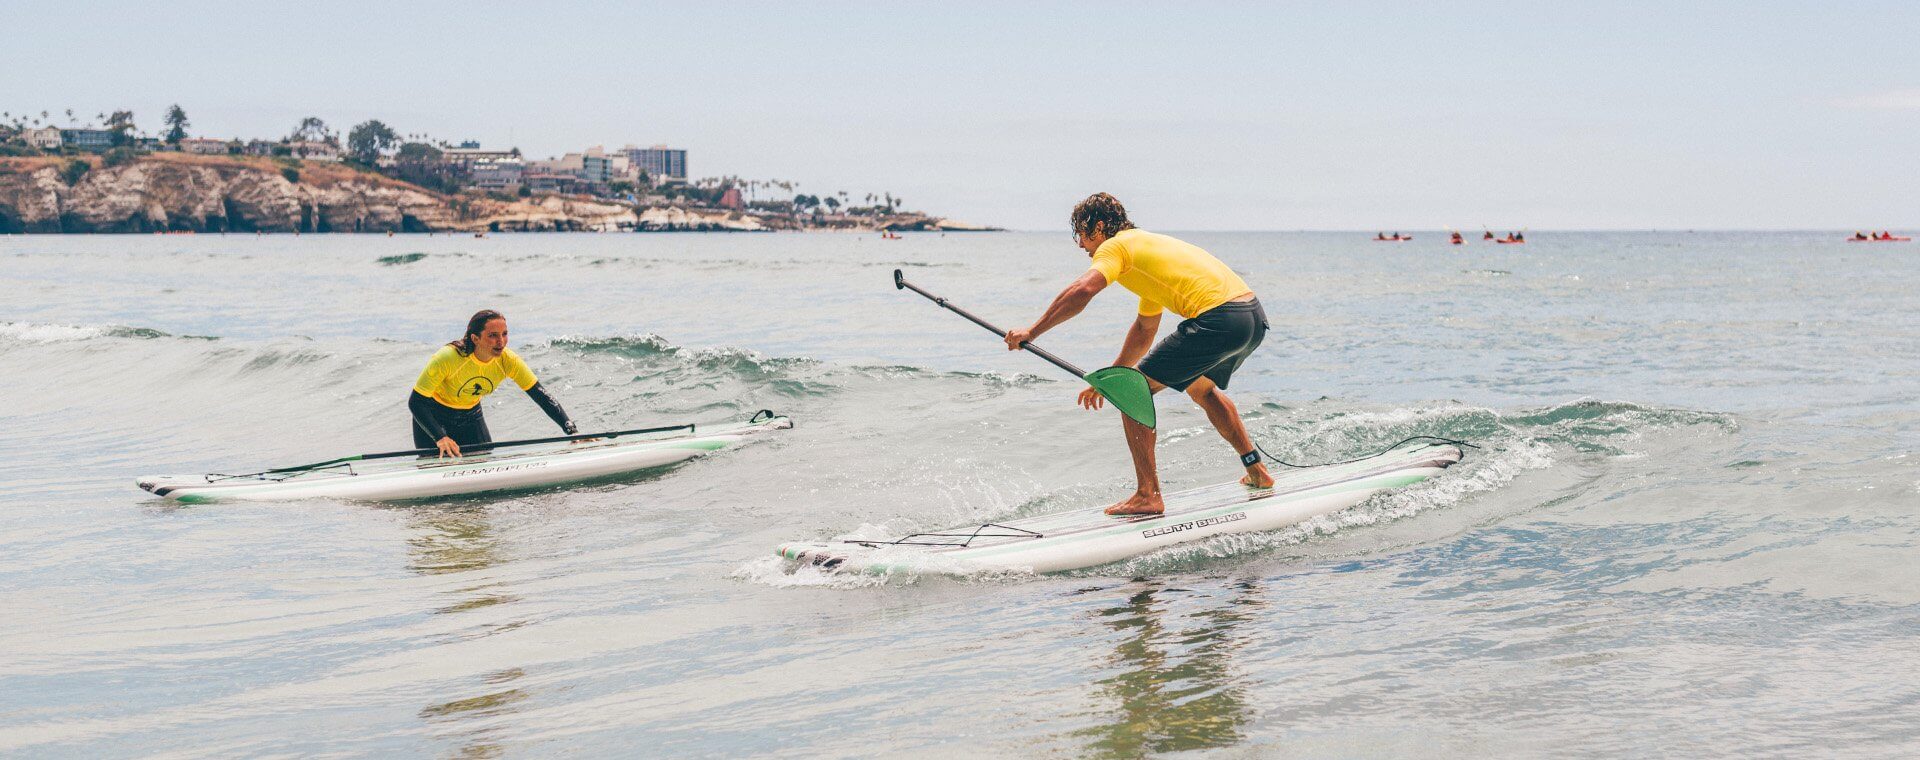 SUP Lesson with Everyday California catching a small wave on their paddle board